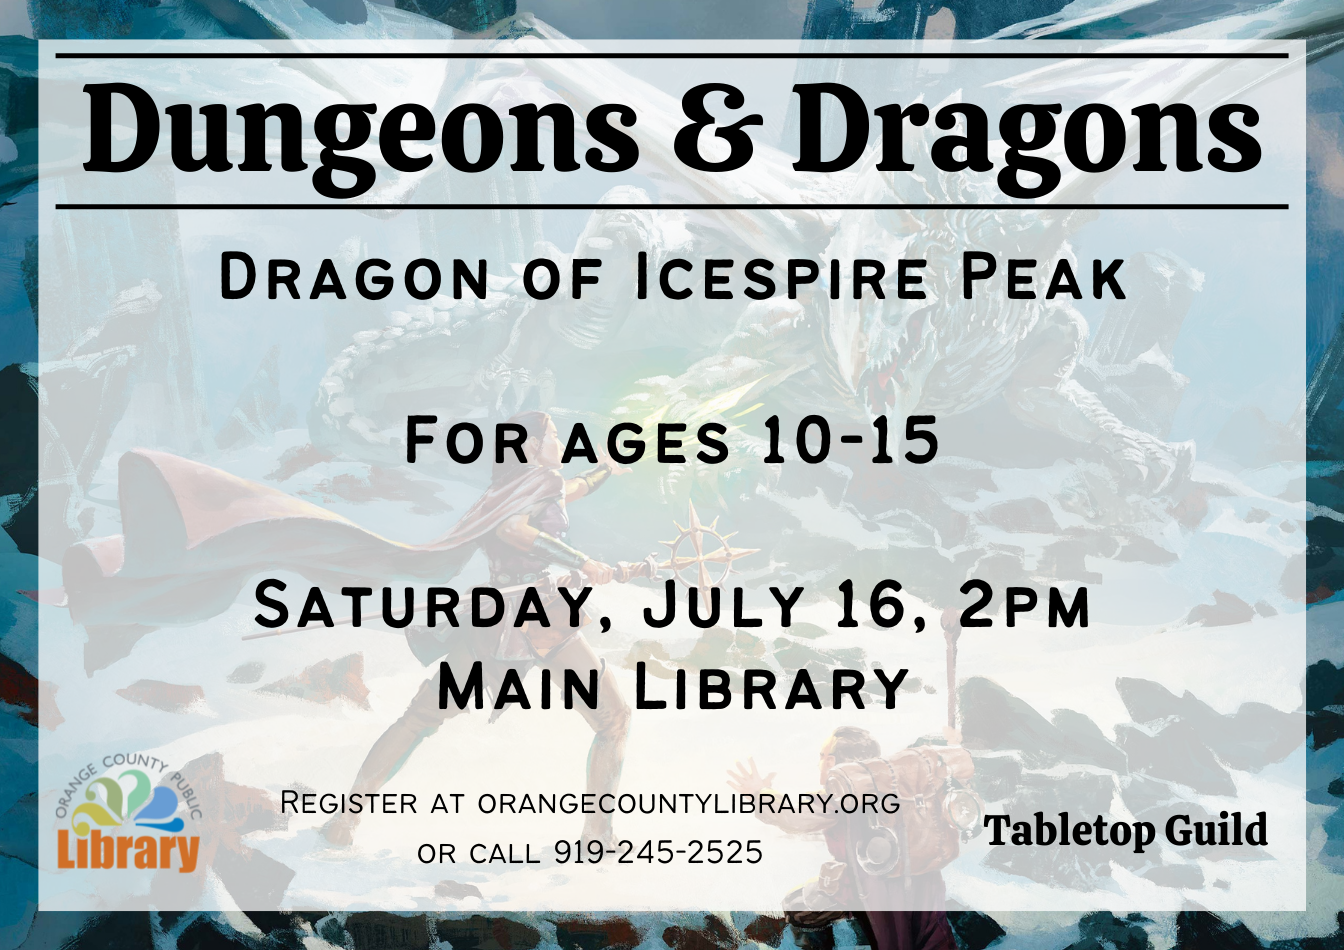 Dungeons & Dragons: Dragon of Icespire Peak. For ages 10-15. Saturday, July 16, 2pm. Main Library.